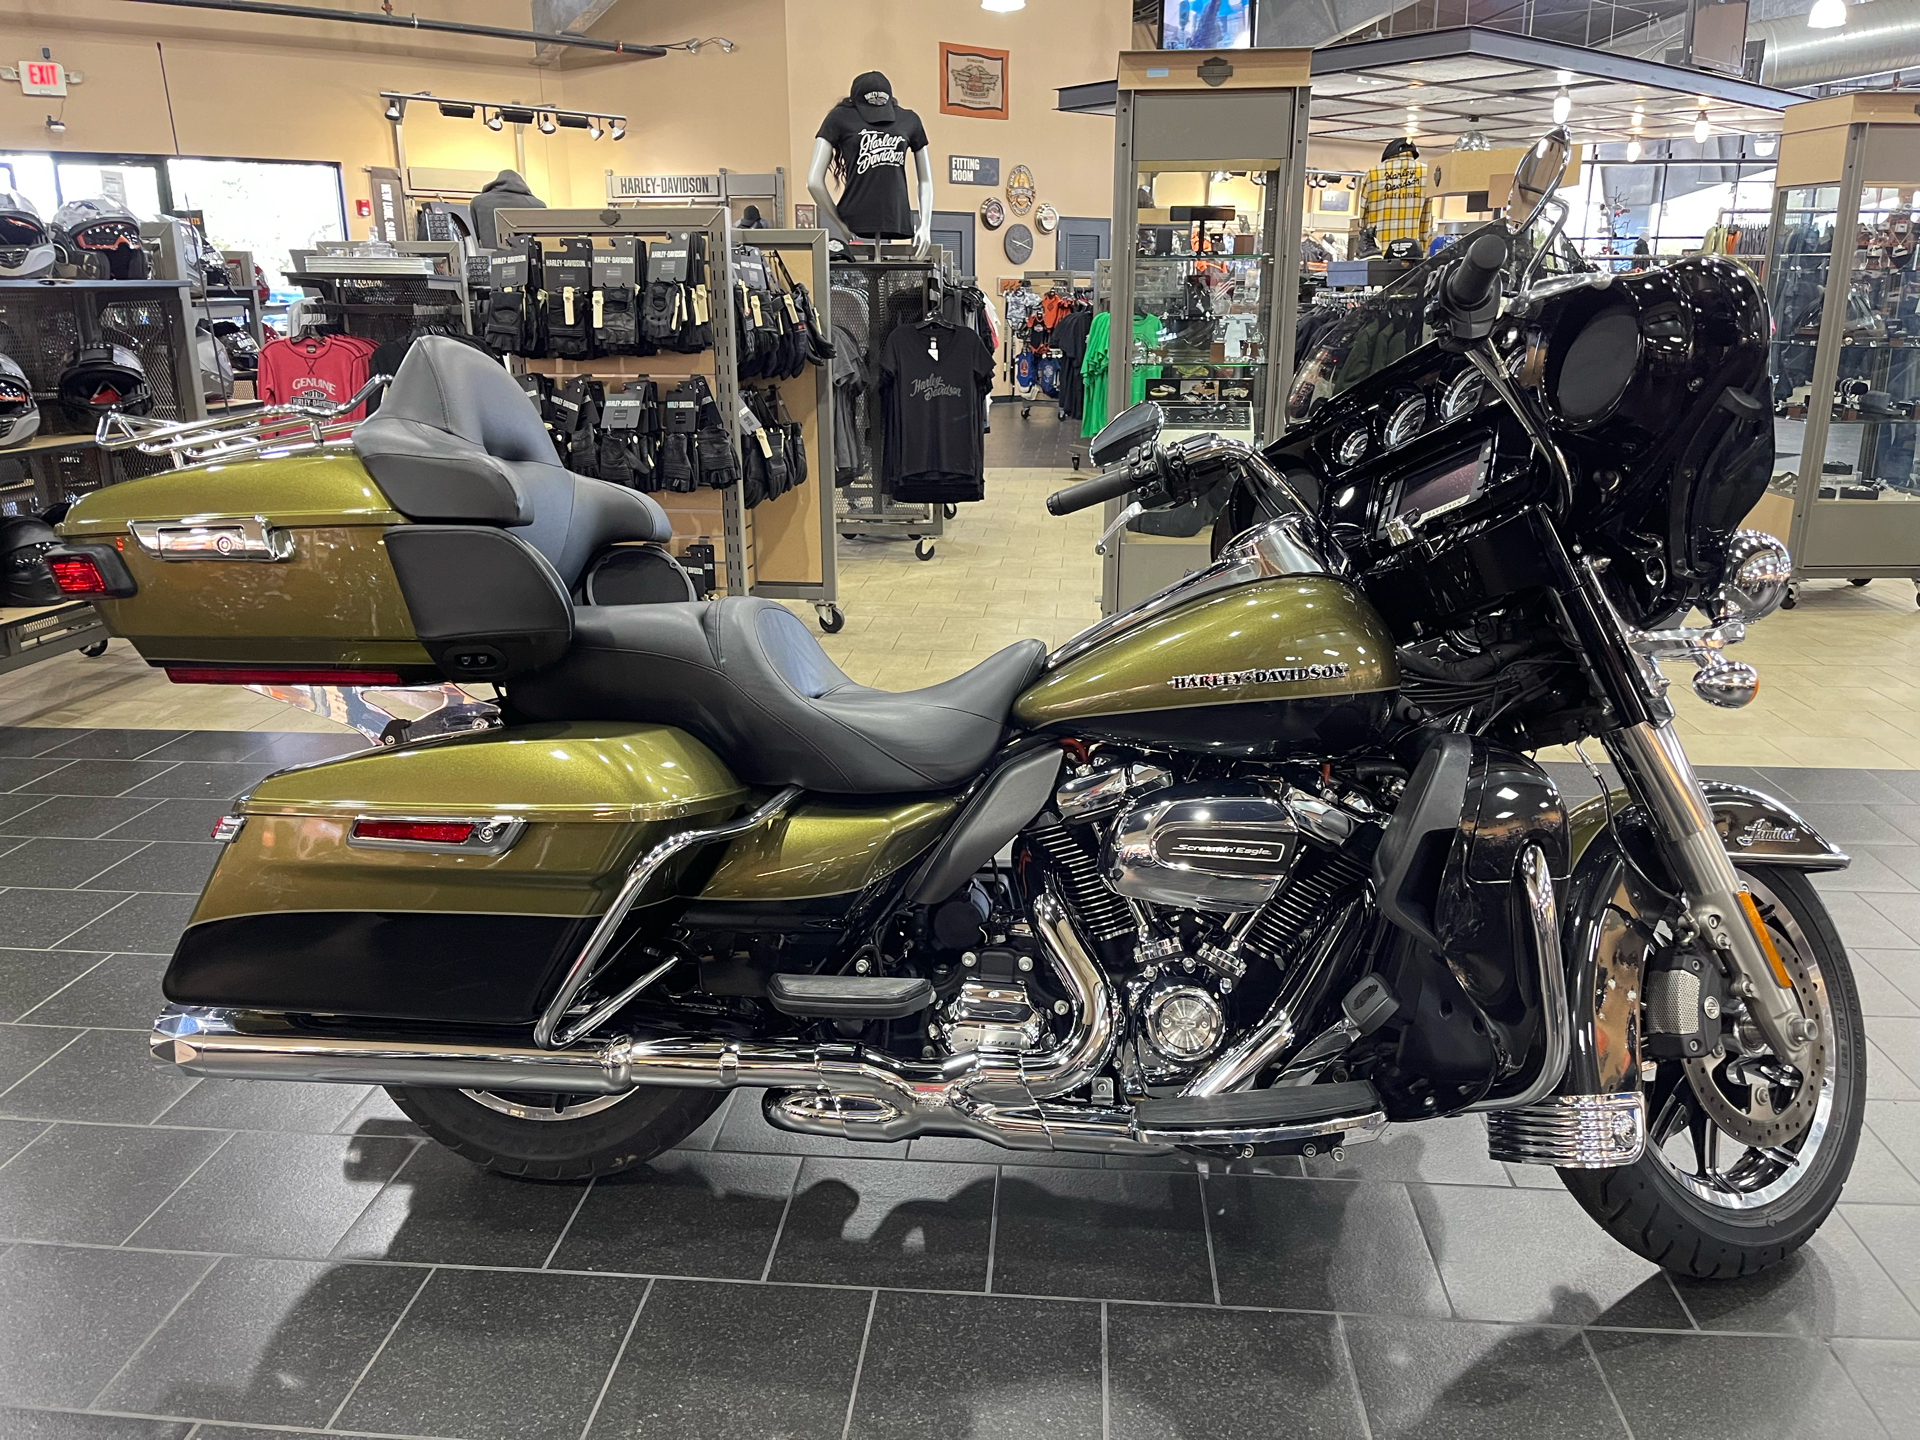 2018 Harley-Davidson Ultra Limited in The Woodlands, Texas - Photo 1